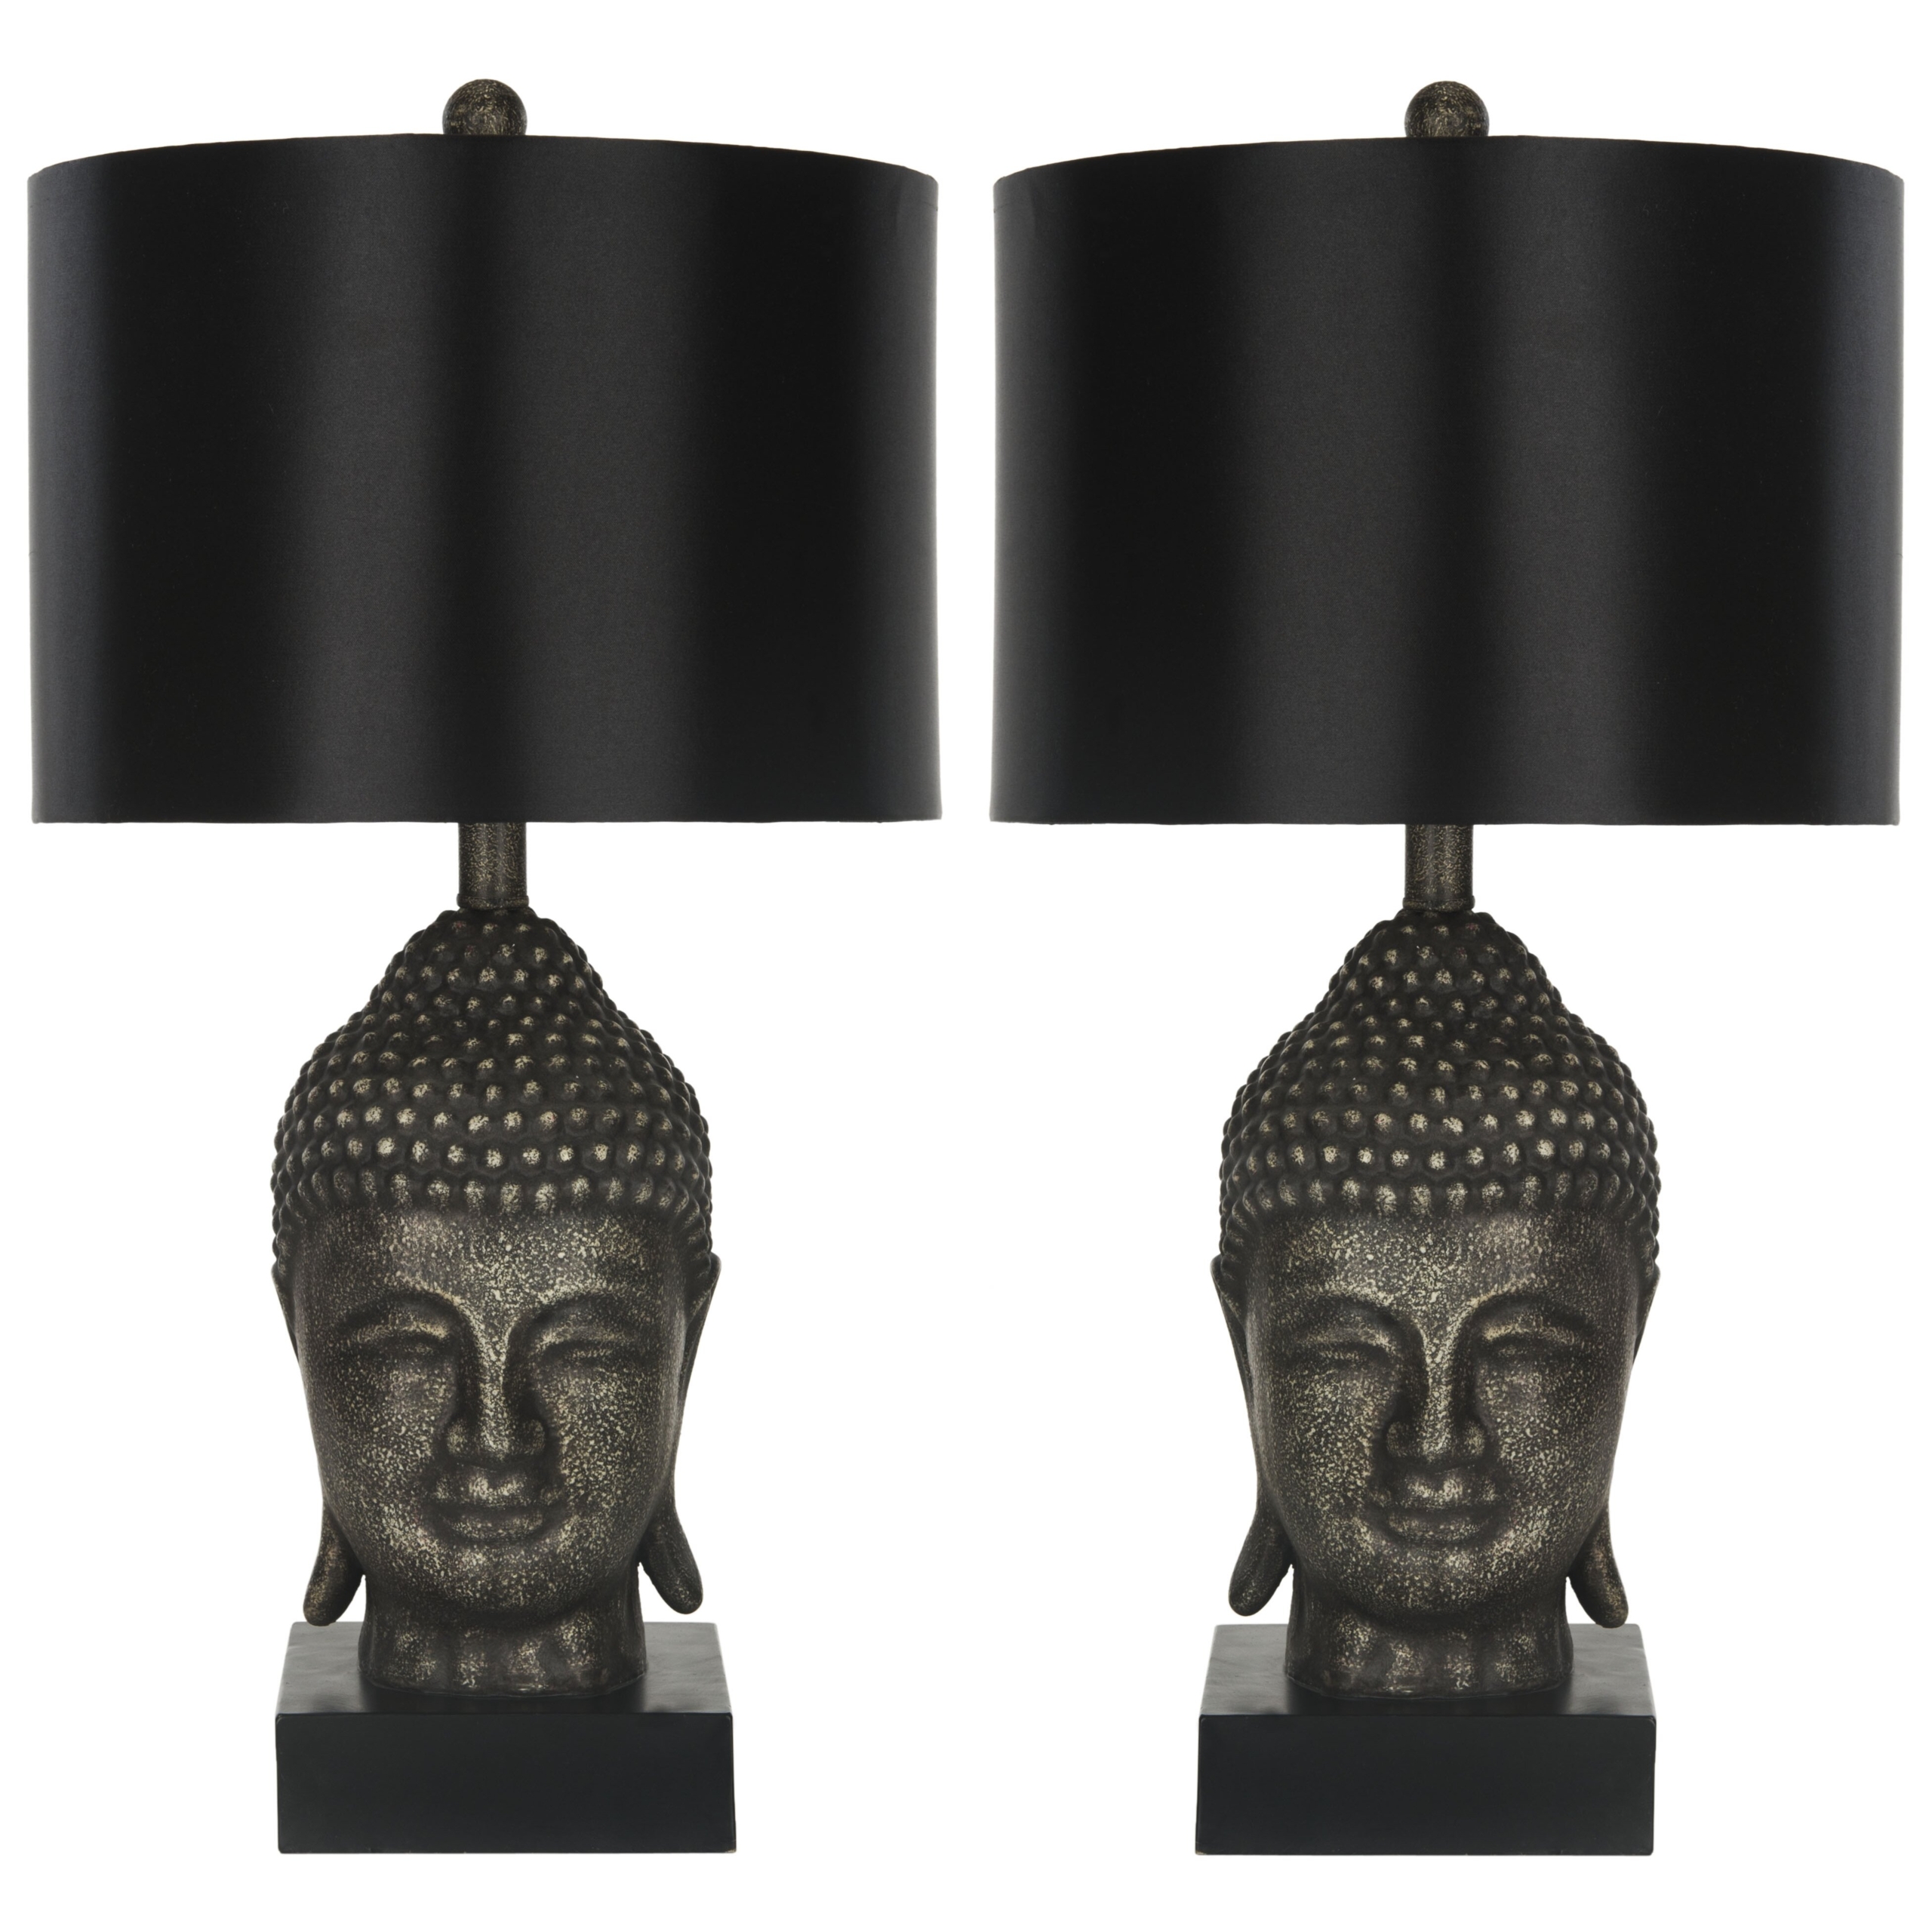 Buddha 24.5" H Table Lamp with Drum Shade (Set of 2)